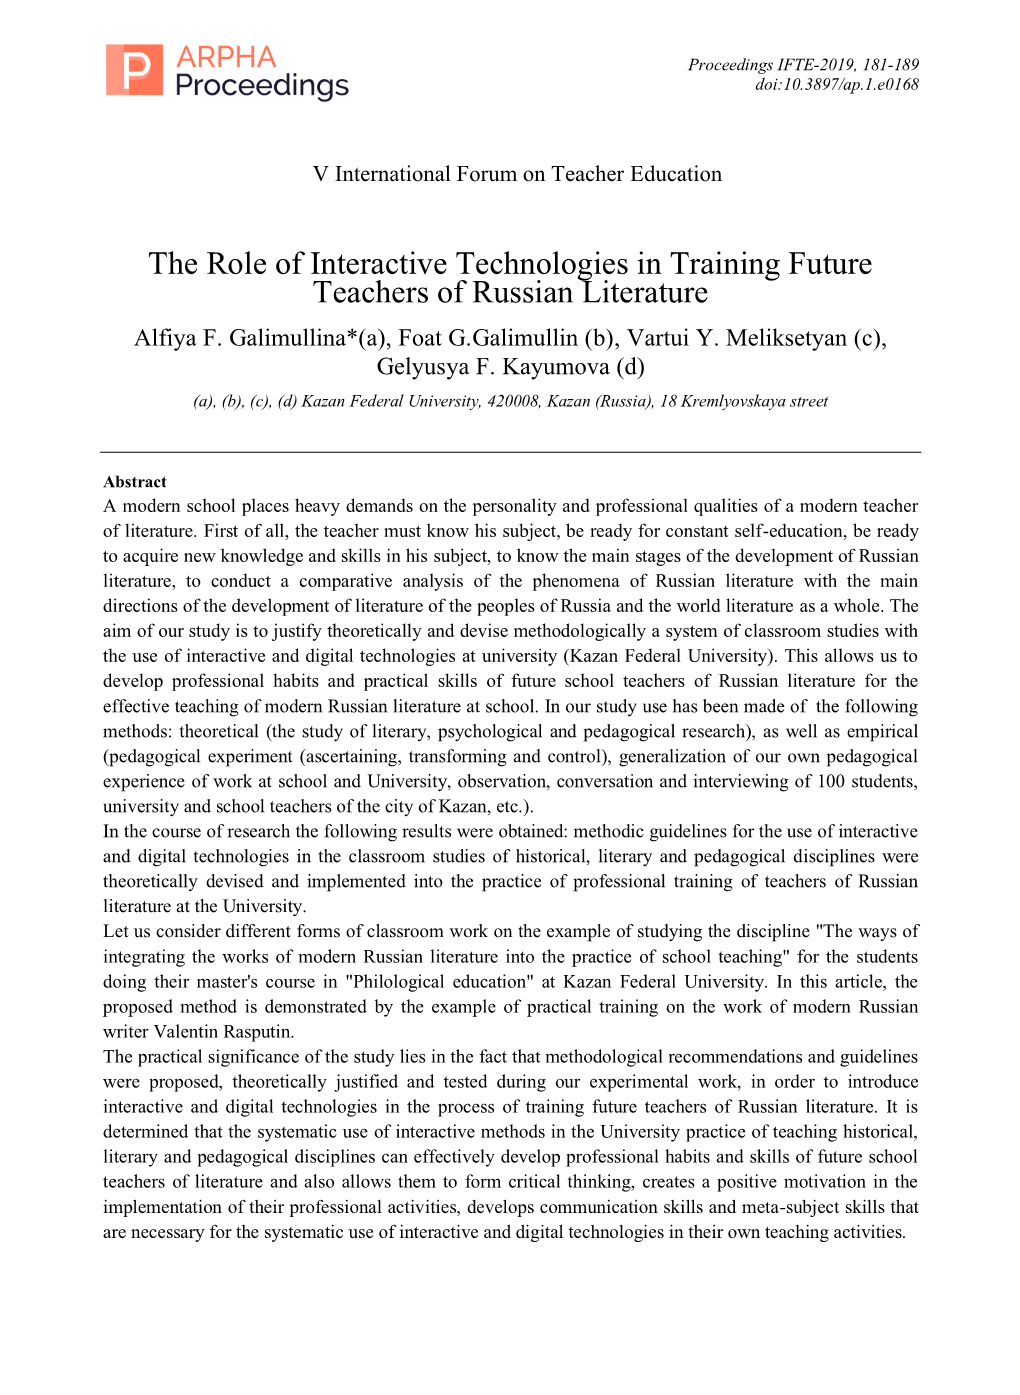 The Role of Interactive Technologies in Training Future Teachers of Russian Literature Alfiya F